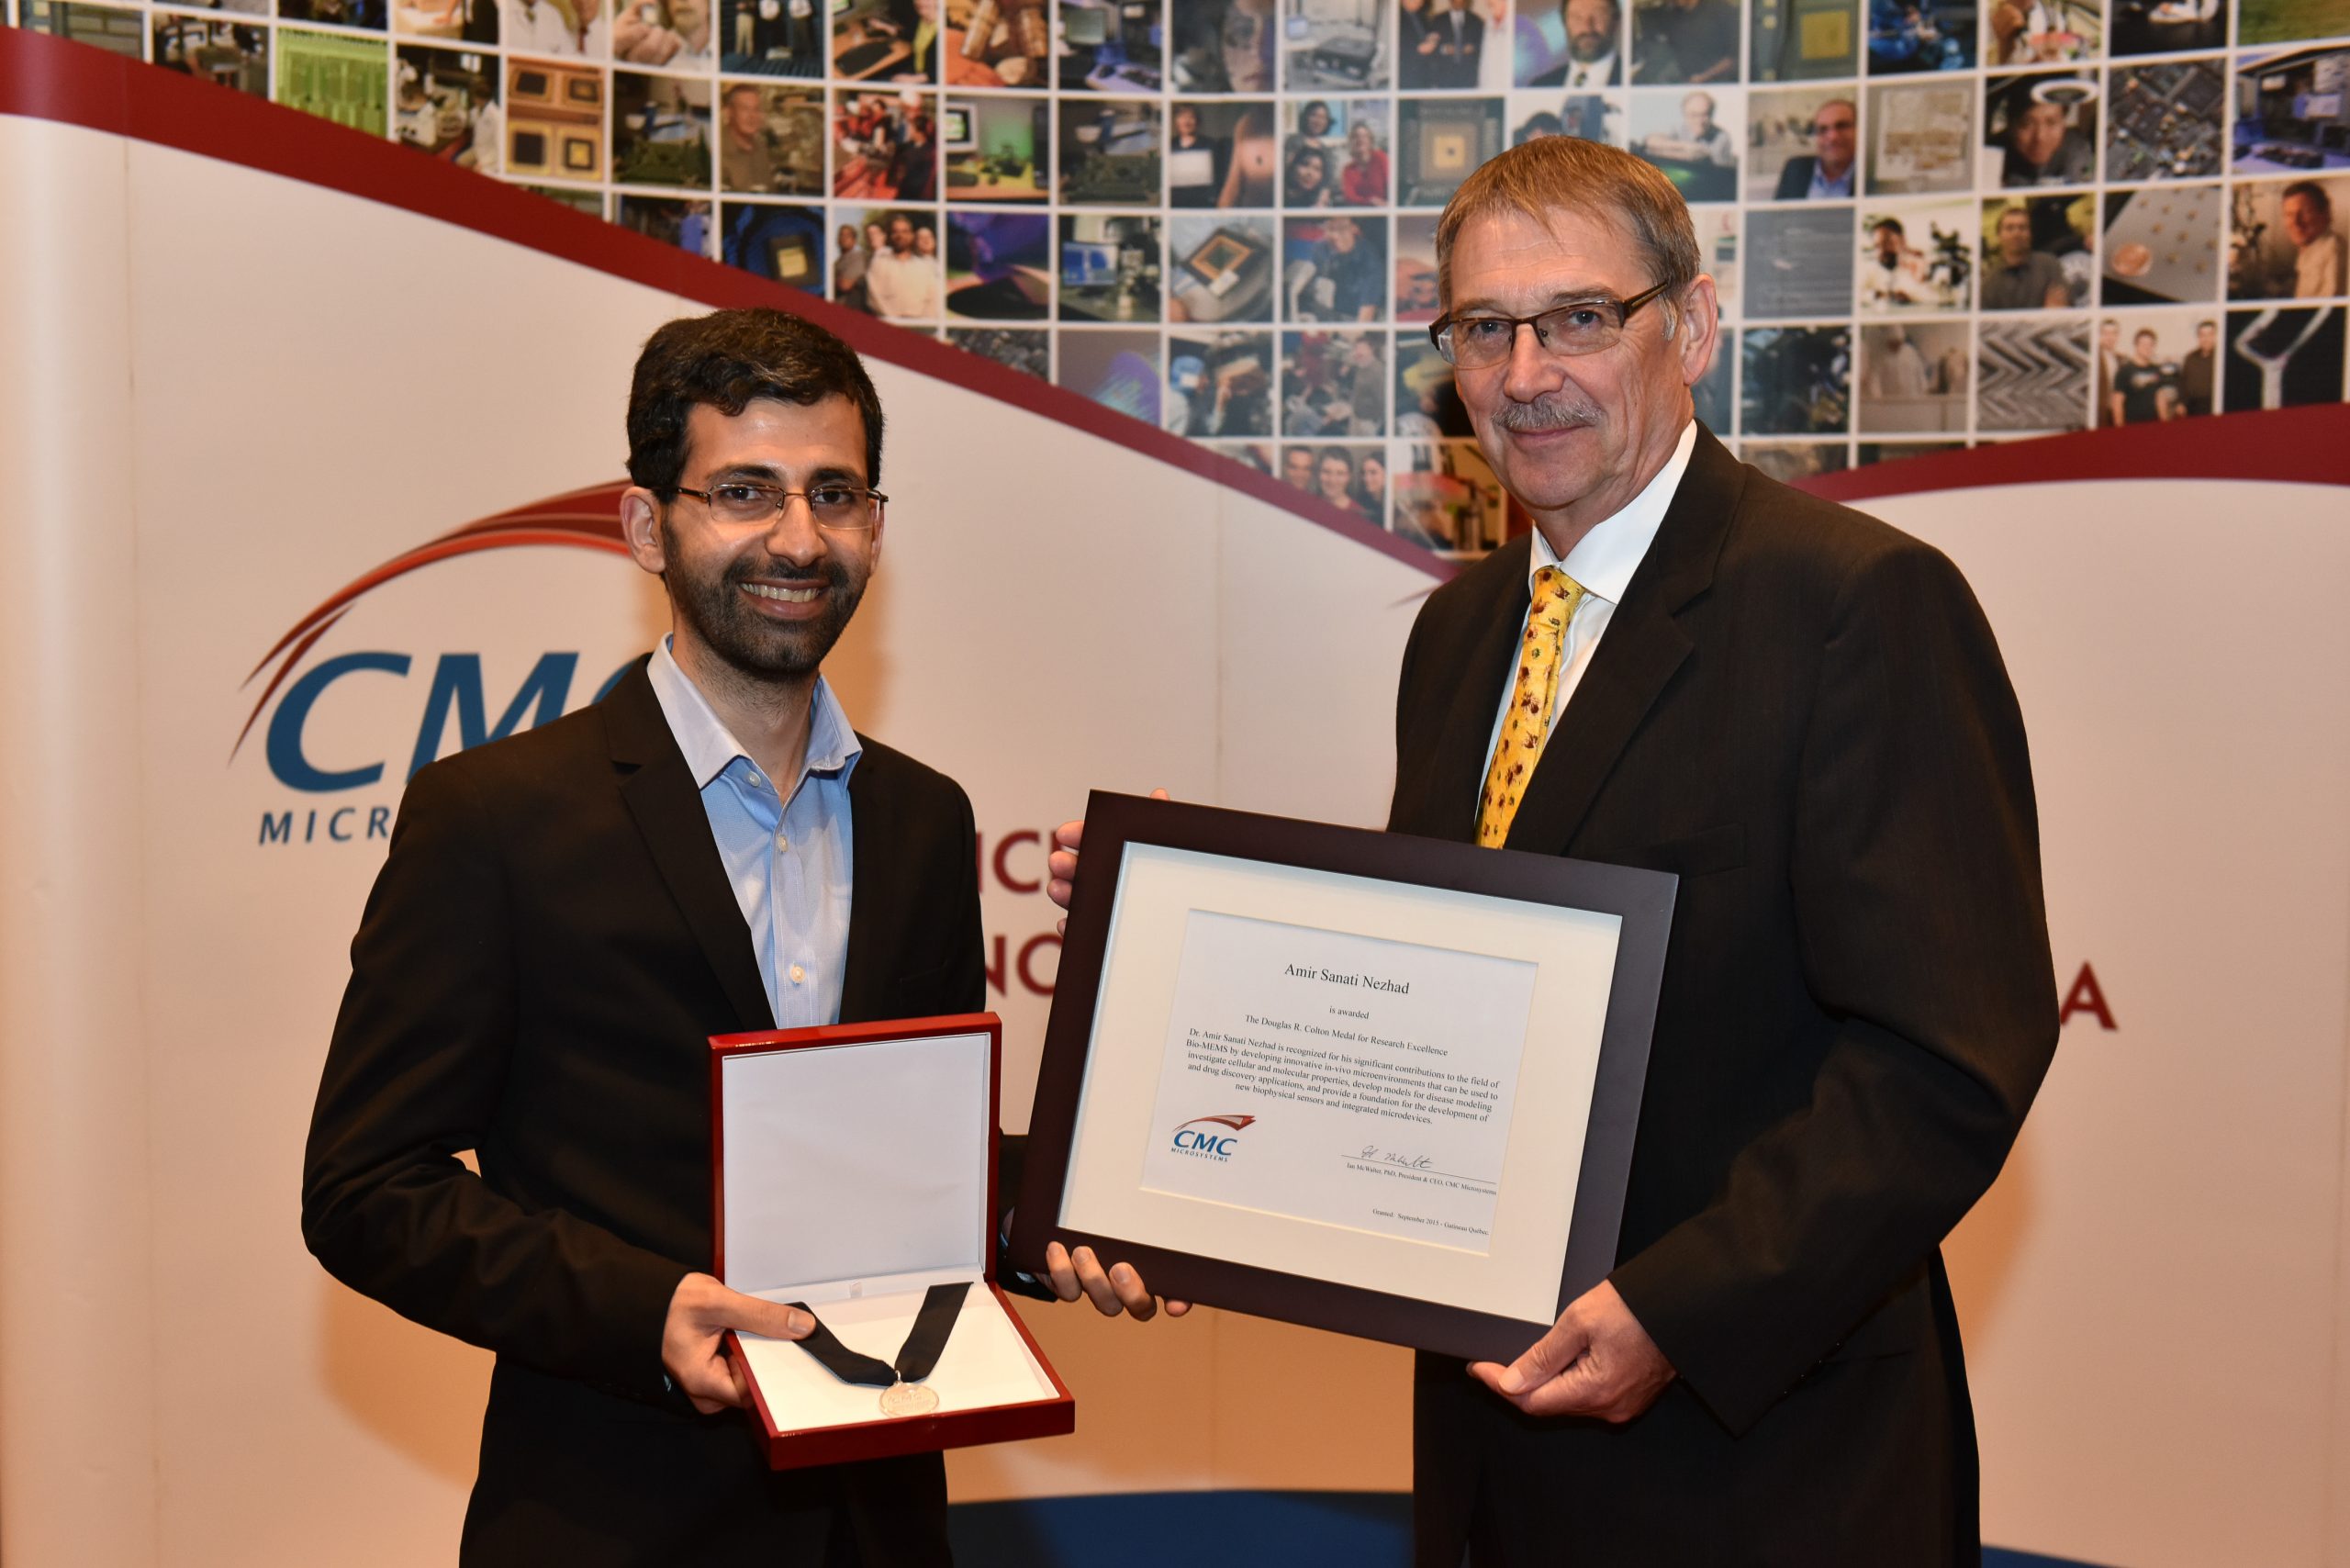 Dr. Amir Sanati-Nezhad & Dr. Ian McWalter holding Colton certificate and medal.